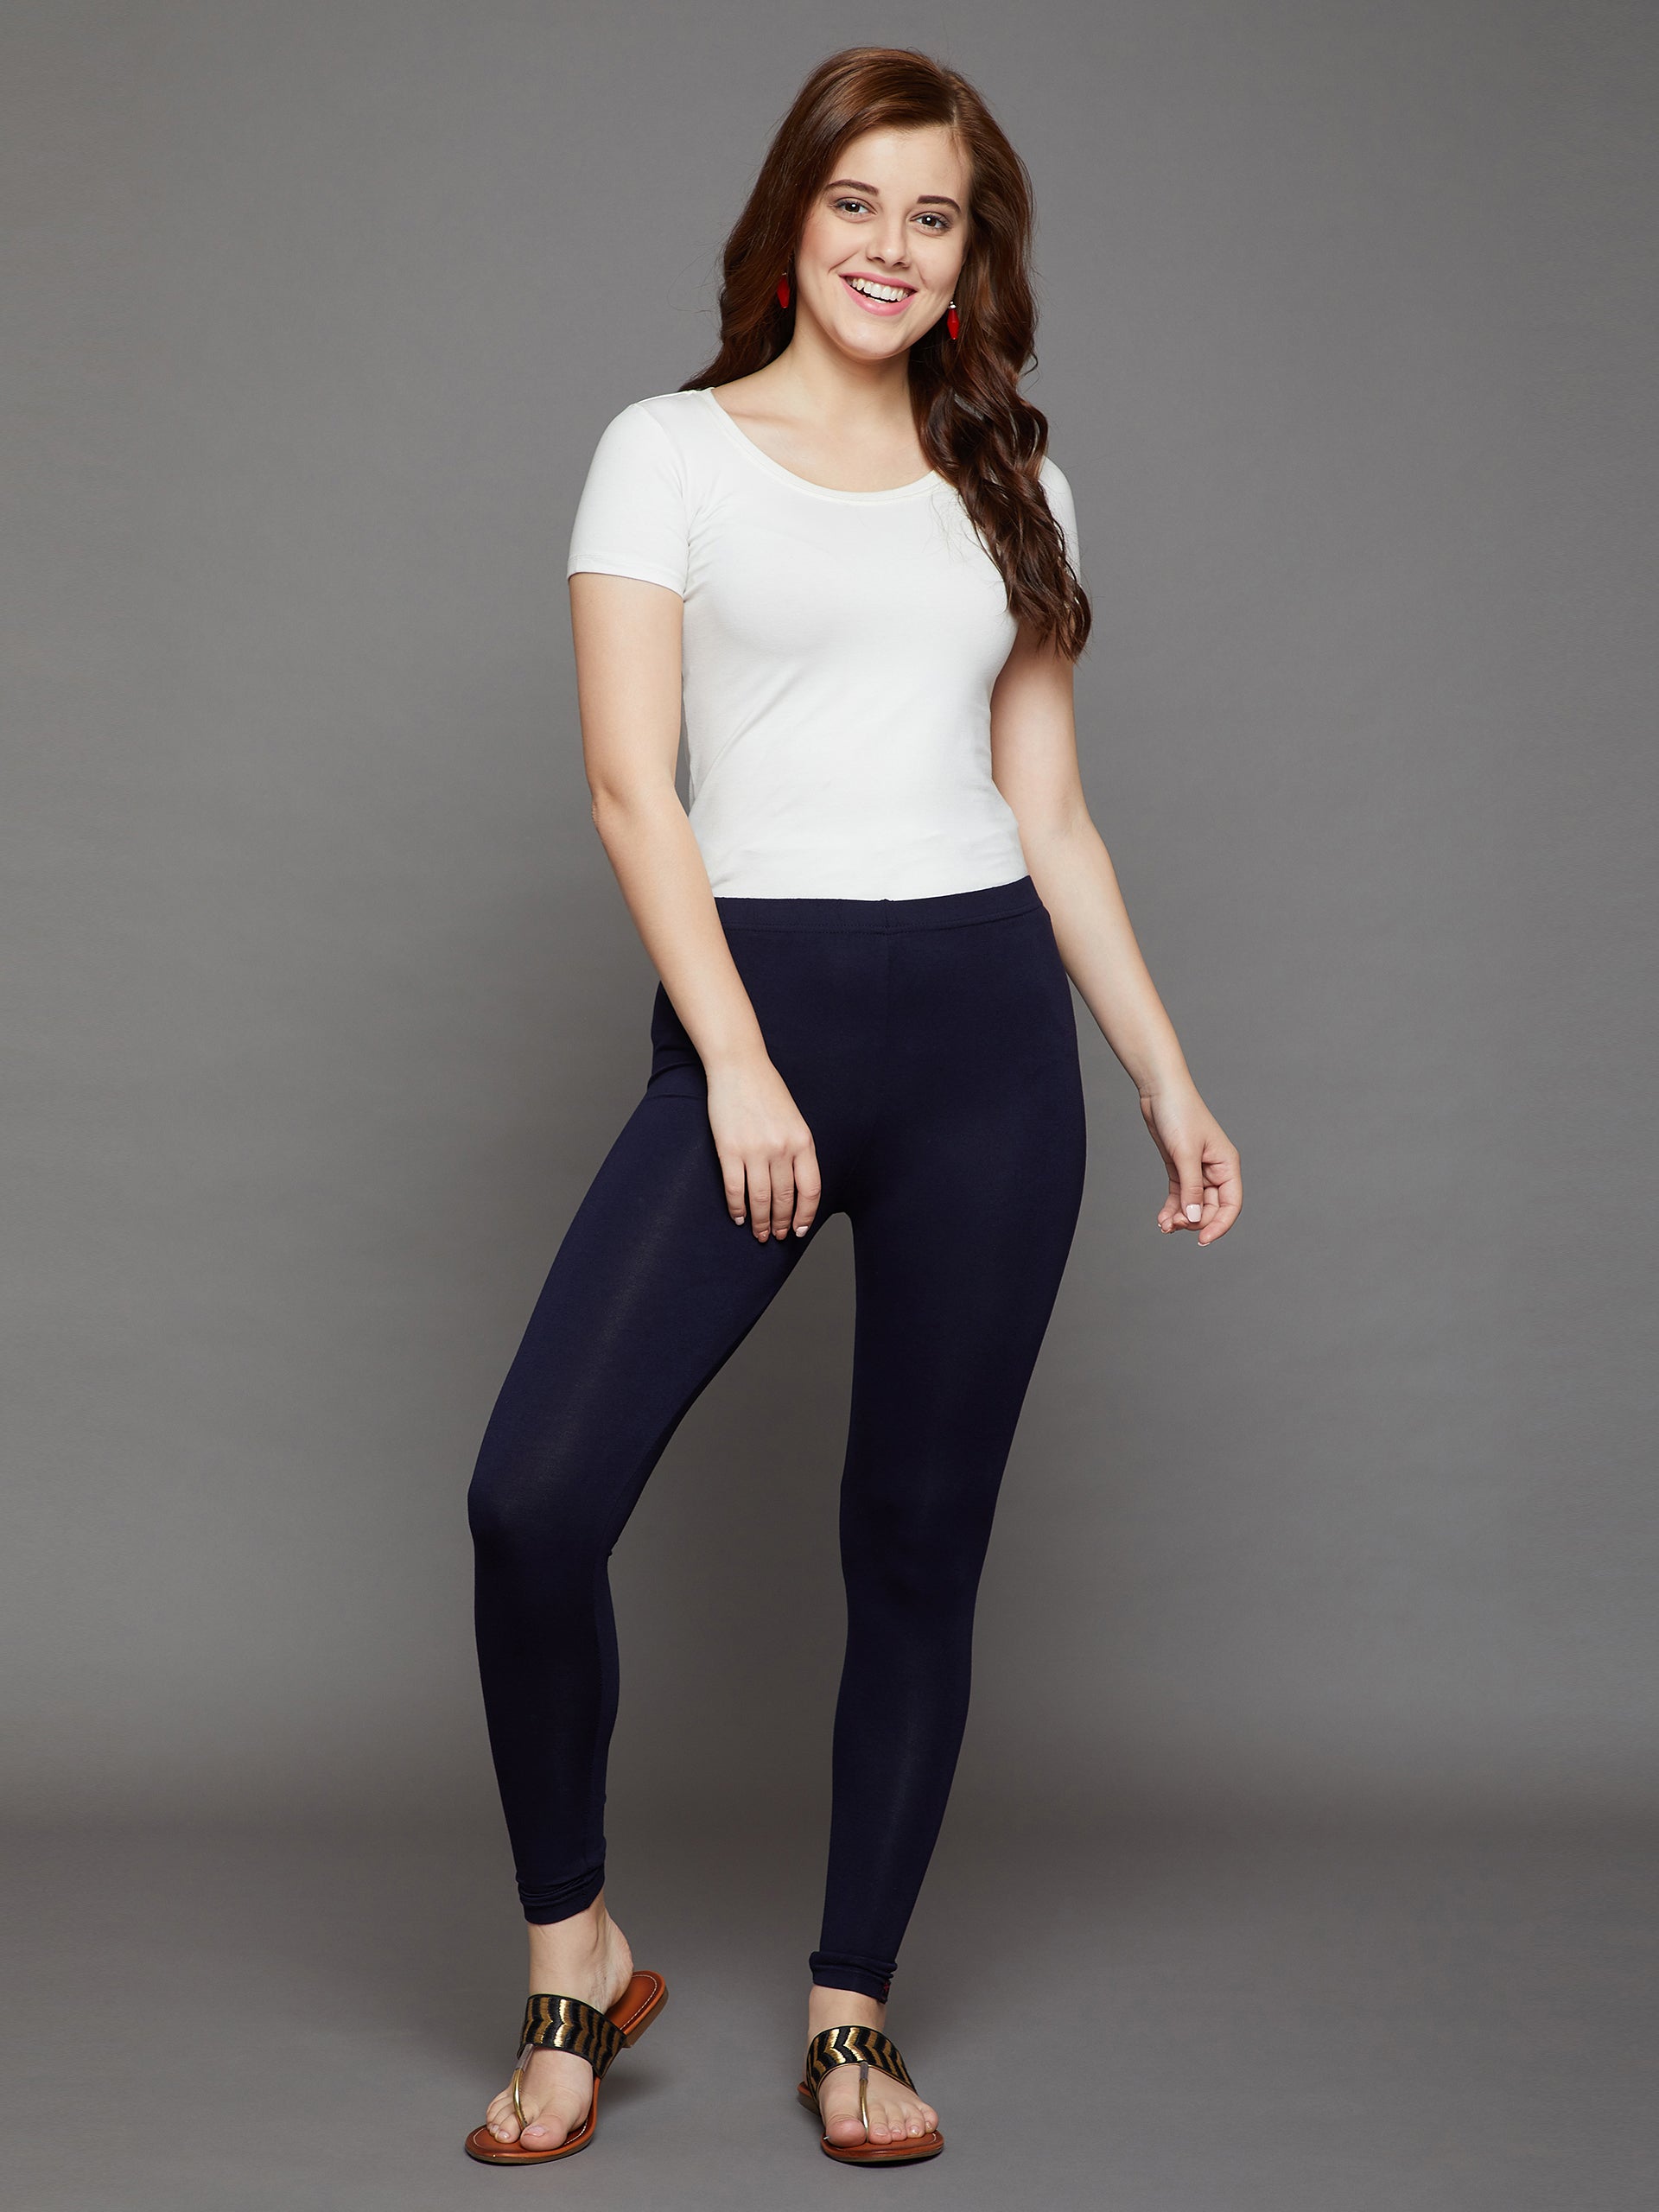 Casual Upto 40 colours Ladies Plain Cotton Legging, Skin Fit at Rs